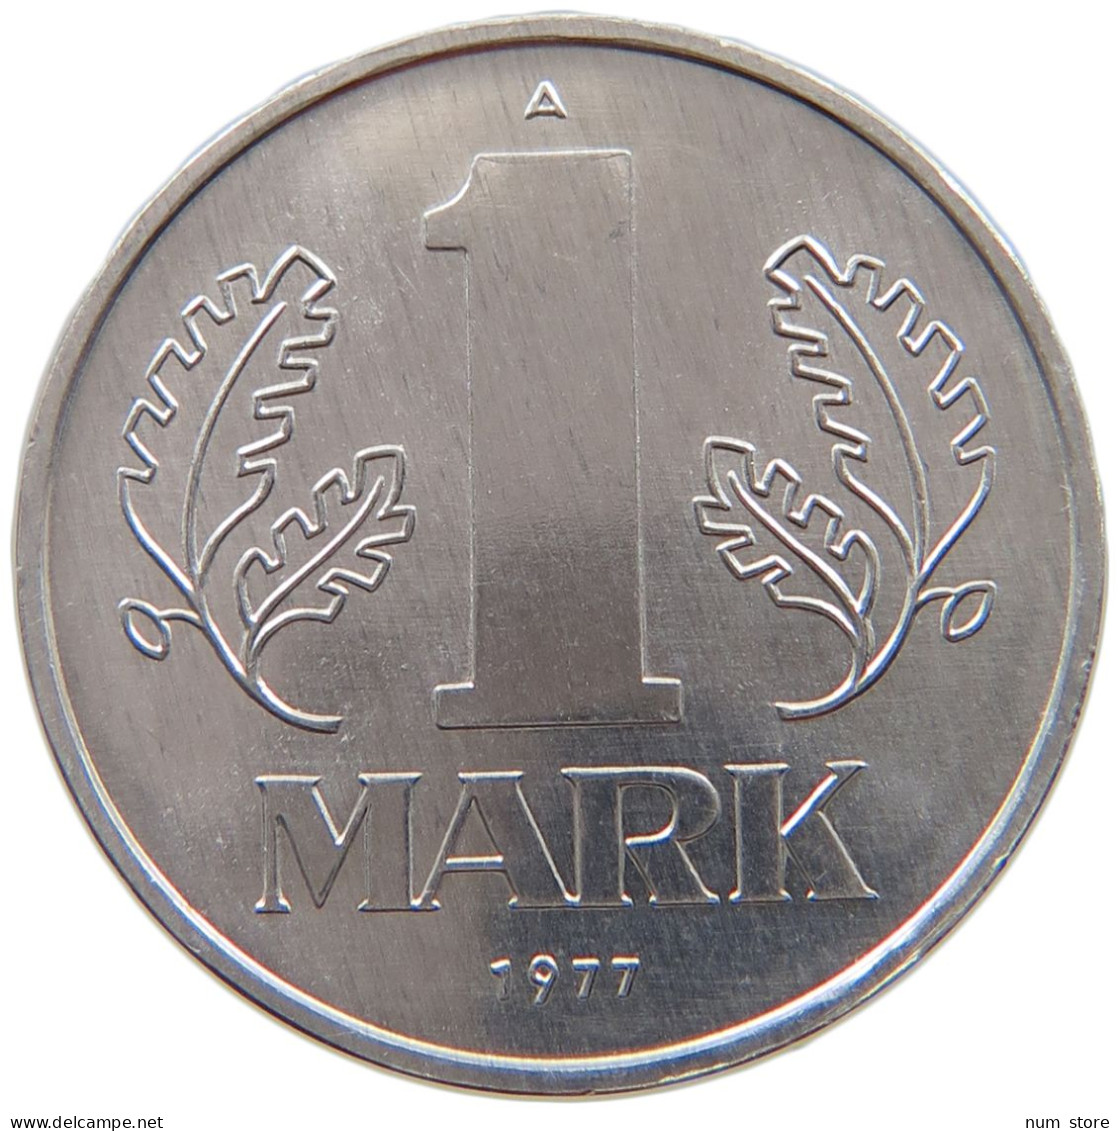 GERMANY DDR 1 MARK 1977 TOP #a076 0253 - 1 Mark